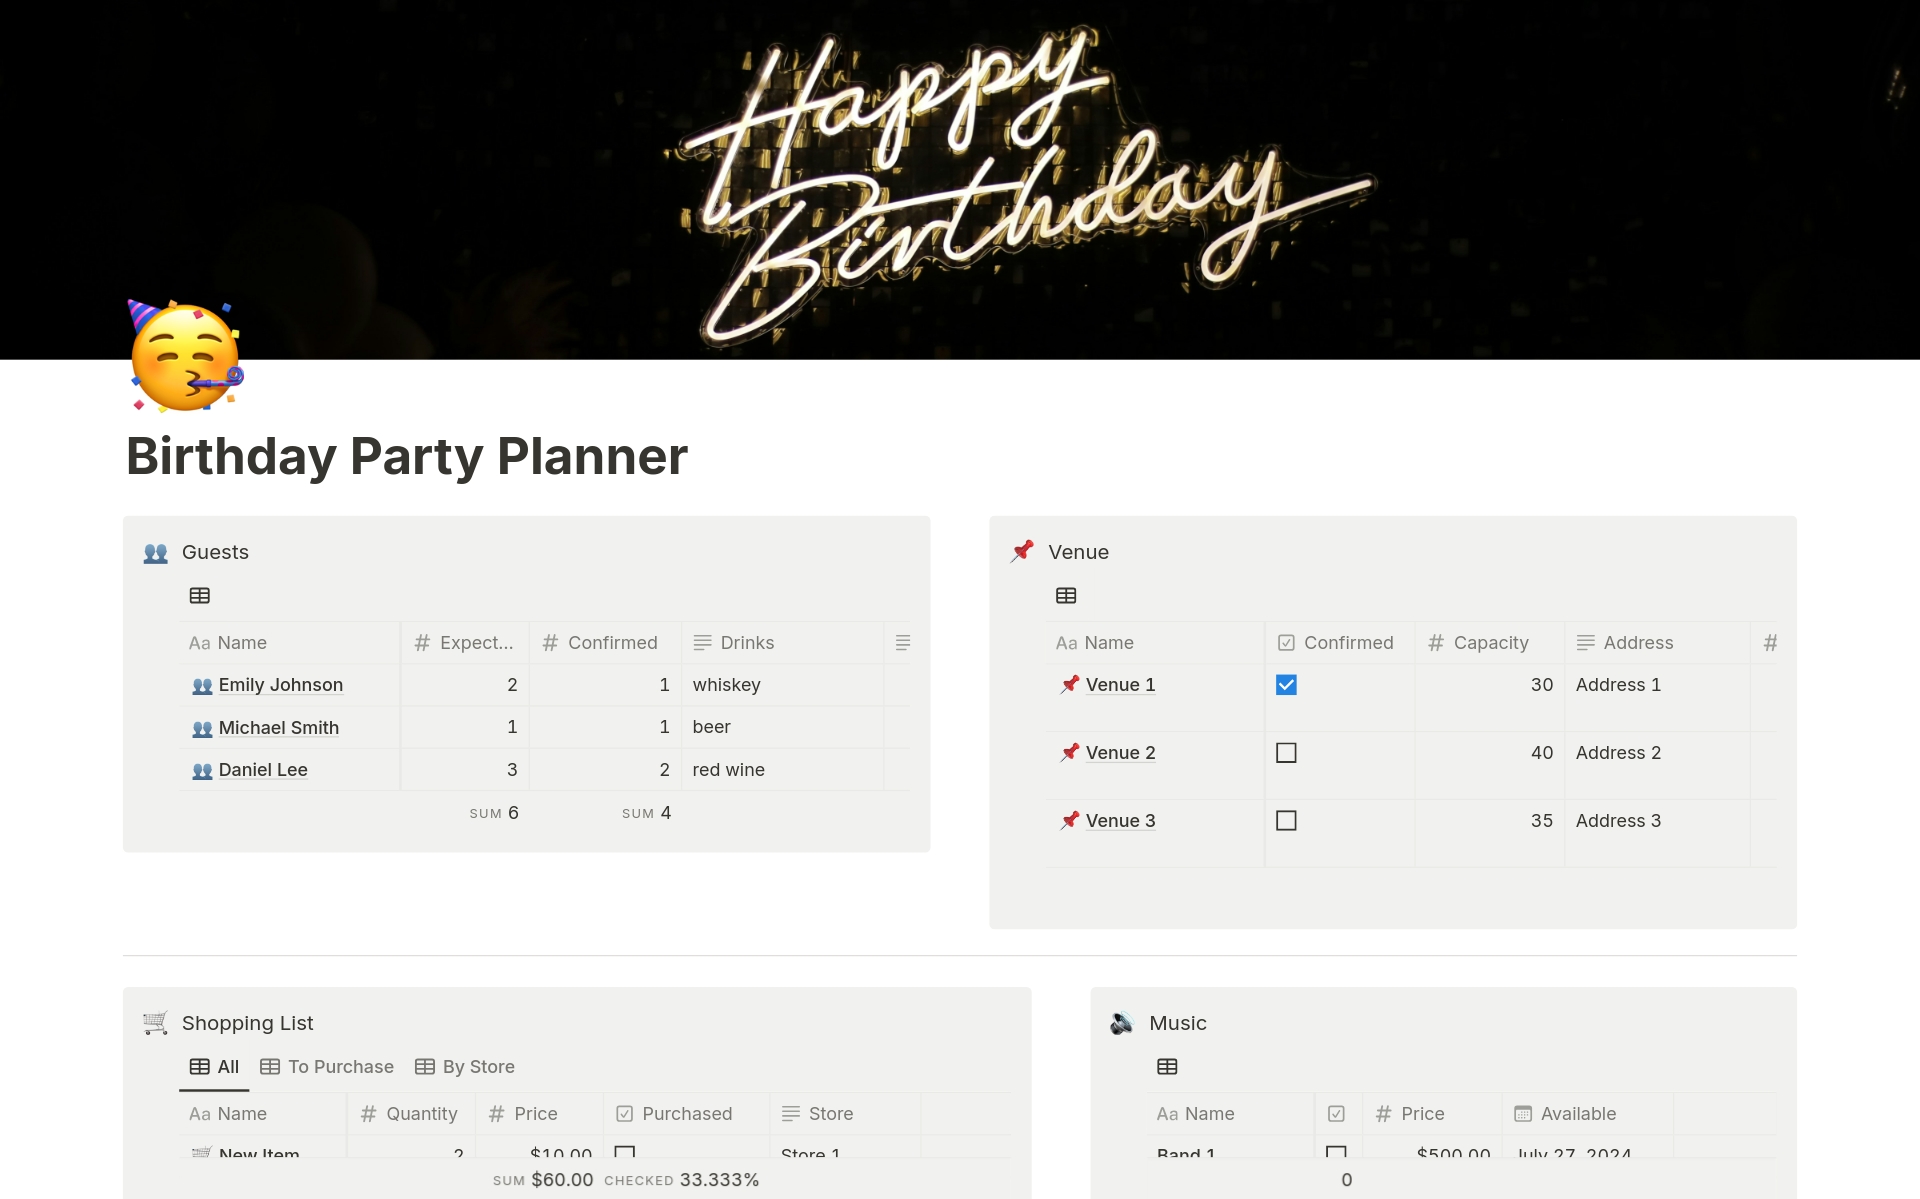 Plan your birthday party effortlessly with our Birthday Party Planner Notion template. Manage guest lists, track venues, organize shopping, and arrange music seamlessly. Save time and reduce stress—focus on enjoying the celebration. Get your template now!